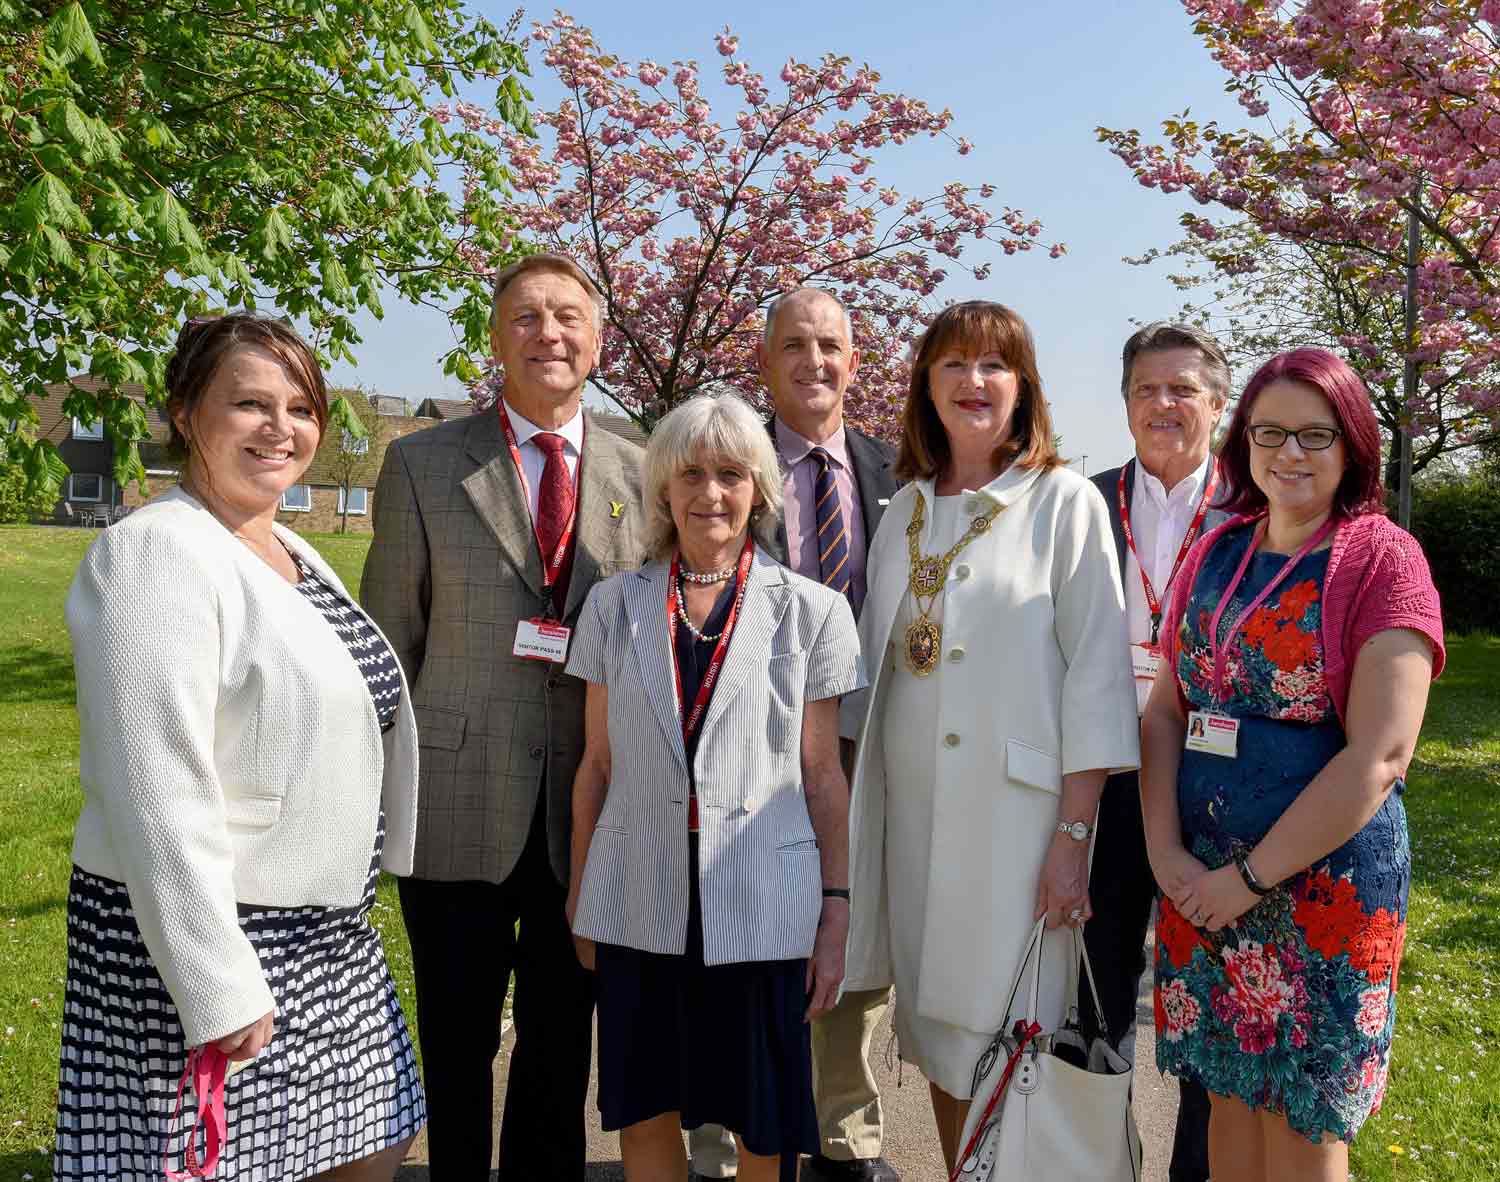 Principal Angela North, left, and Director of Fundraising Fiona Ashcroft, right, welcome the visitors, from left, the Lord Lieutenant Barry Dodd, Frances Dodd, Chief Executive Nick Marr, Mayor of the Borough of Harrogate Anne Jones and Steve Jones